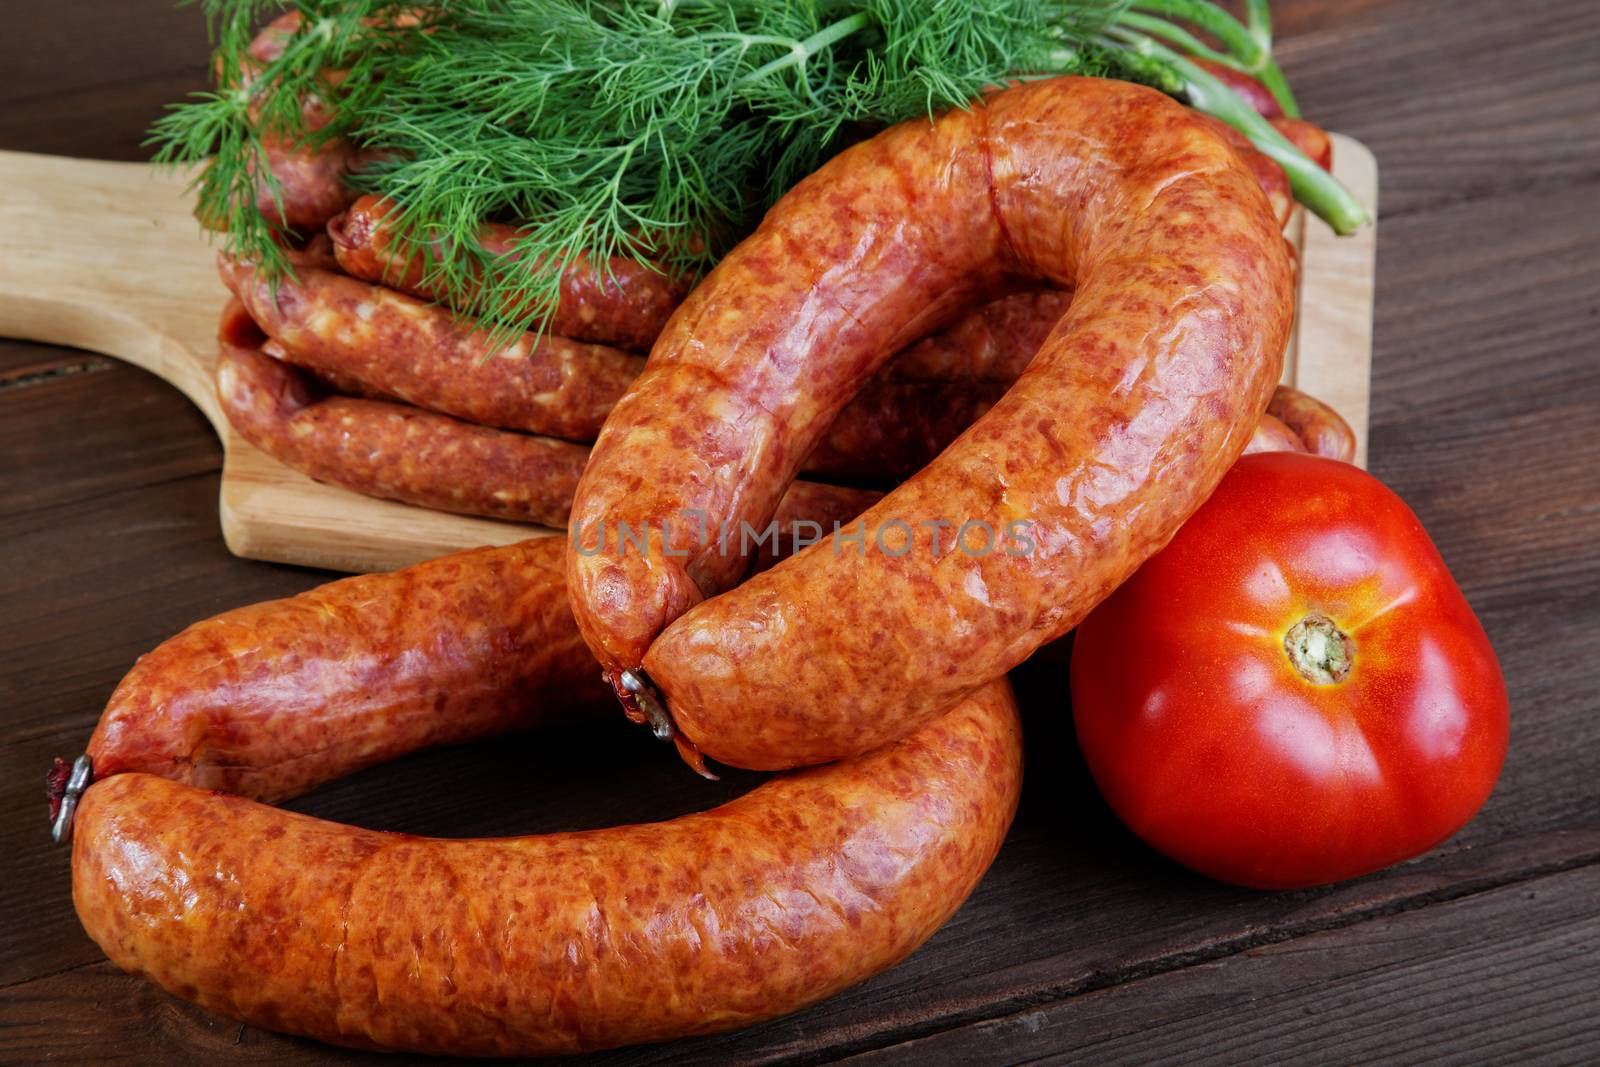 Smoked sausage on a kitchen table